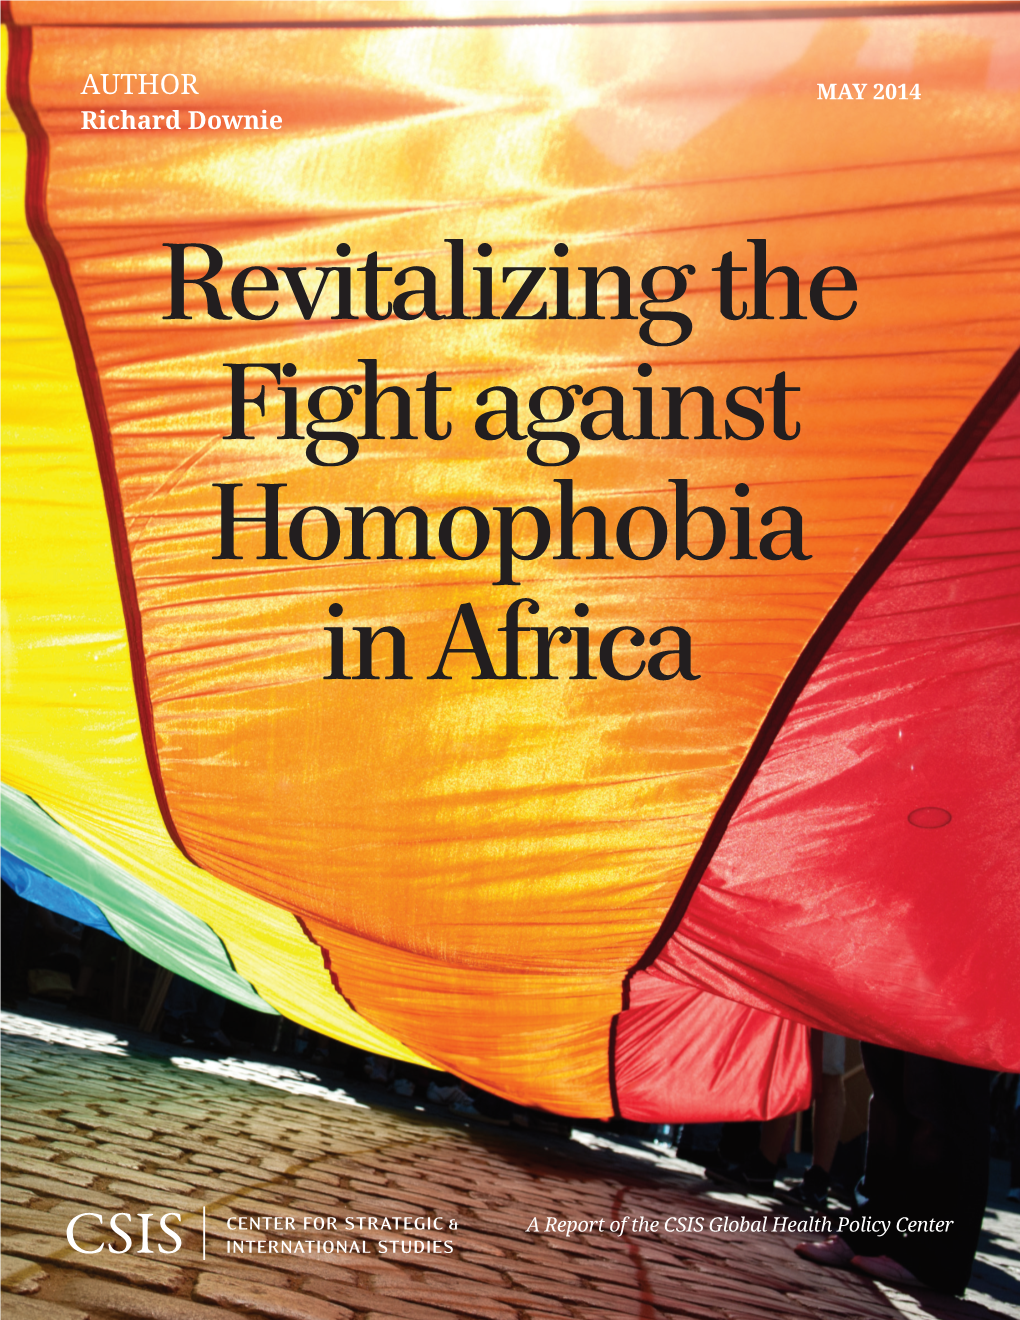 Revitalizing the Fight Against Homophobia in Africa